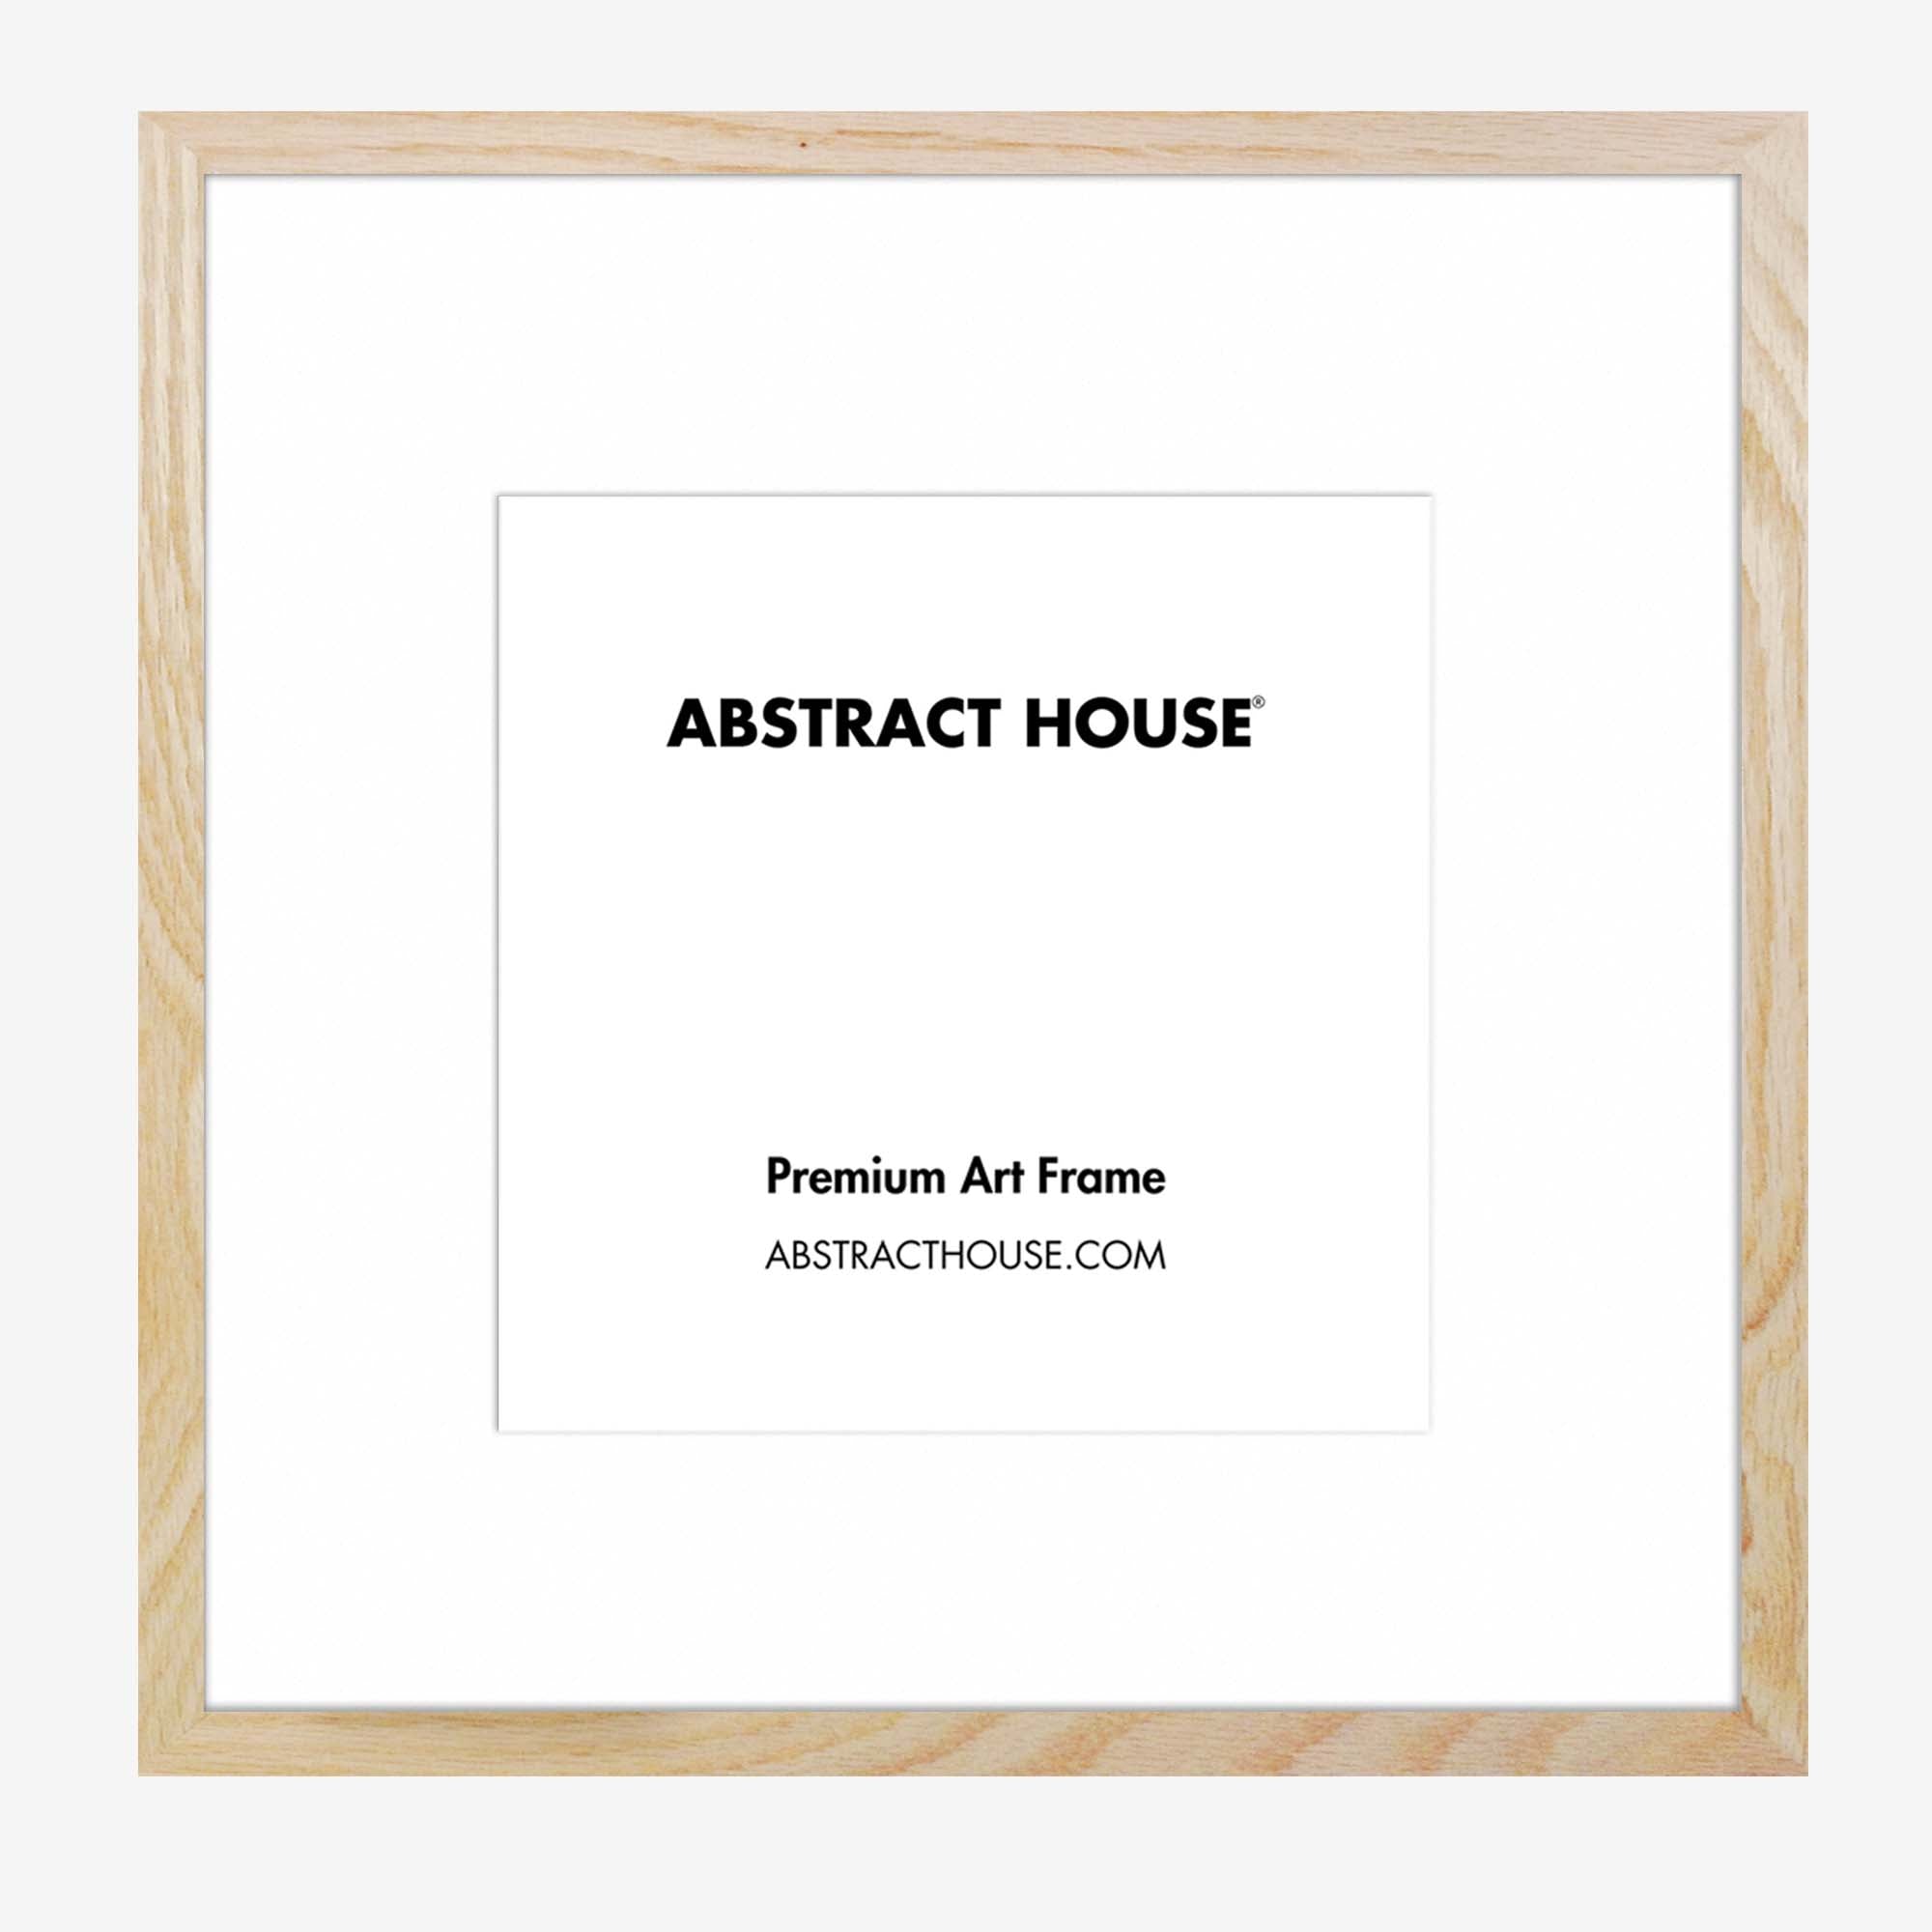 50x50 cm Wooden Frame-Oak-30 x 30 cm / 11.8 x 11.8 Inches-Abstract House